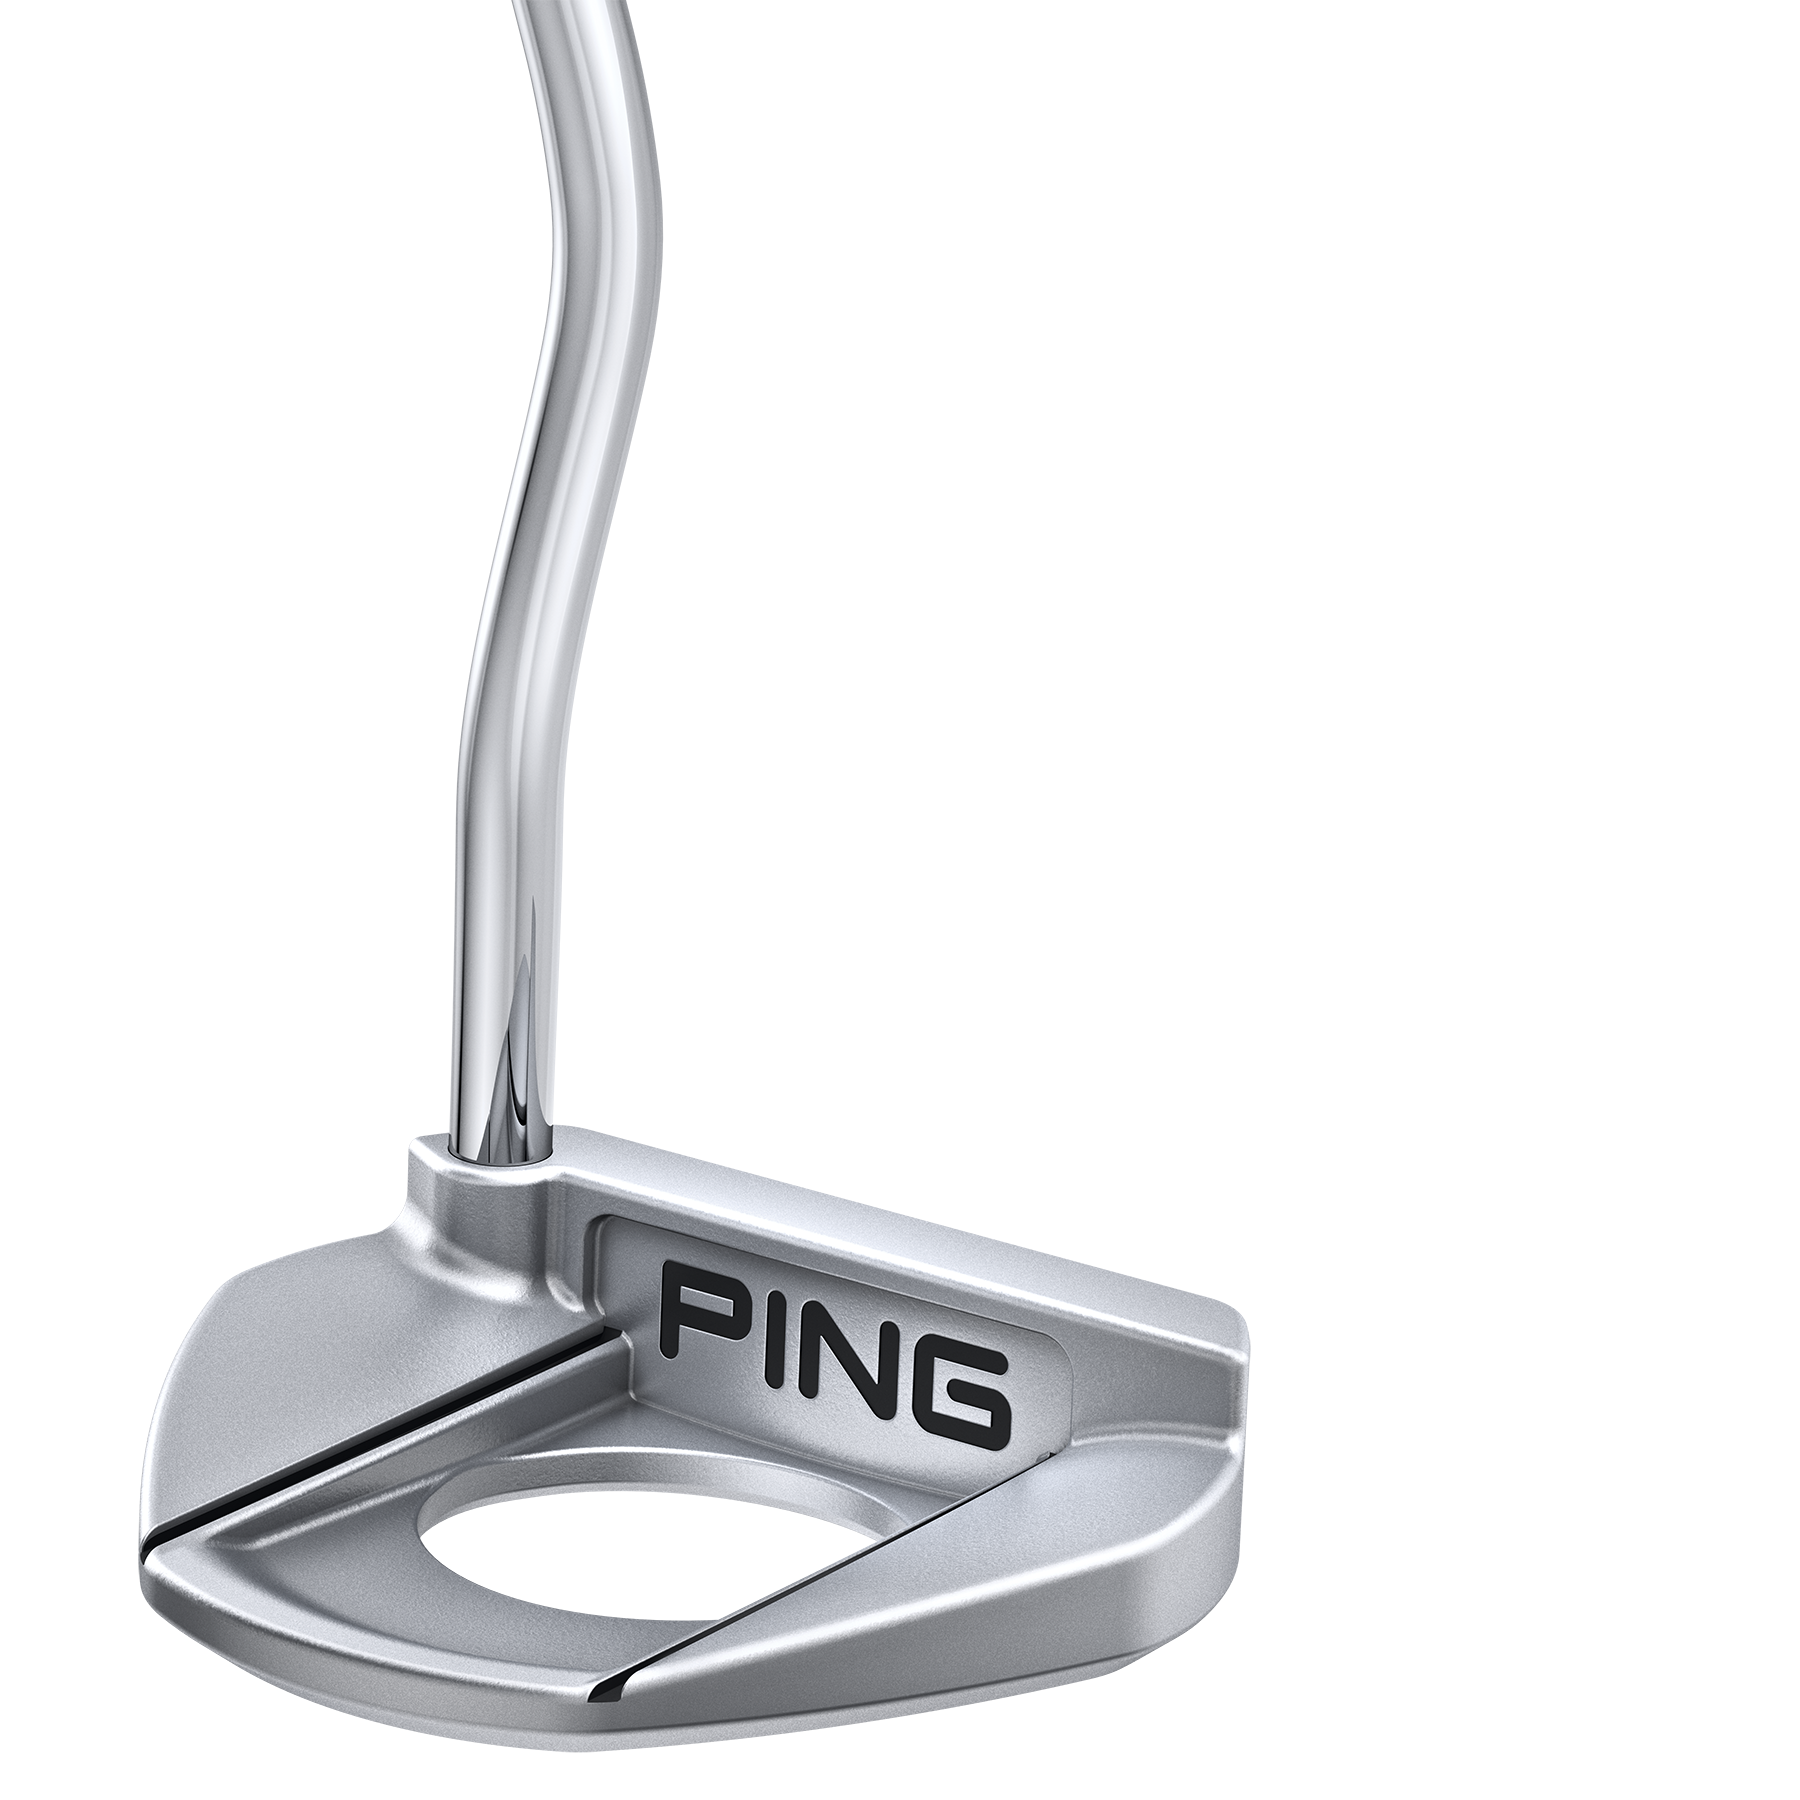 PING introduces Sigma 2 putters